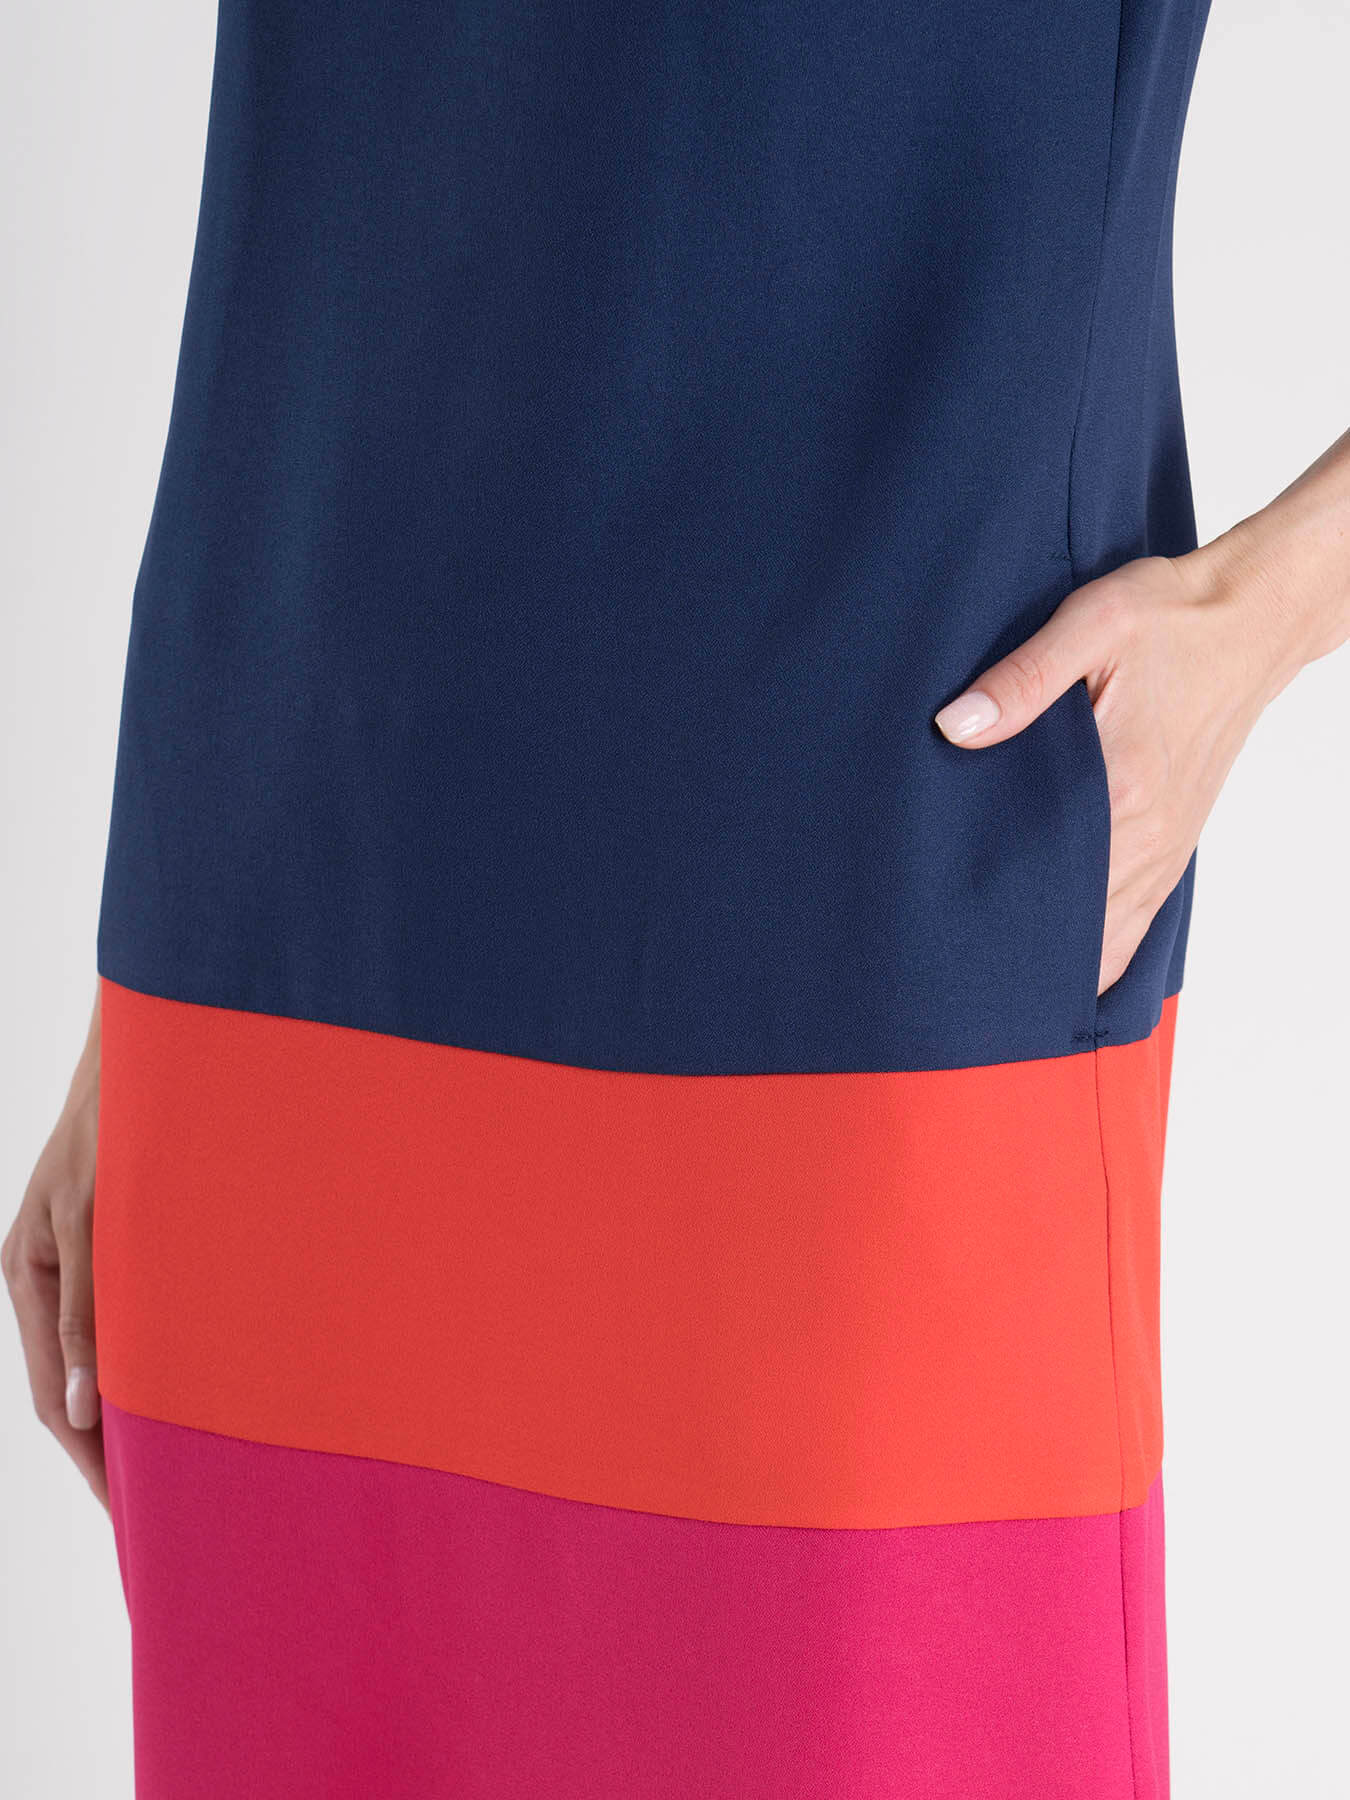 Boat Neck Color Block Shift Dress - Navy, Coral And Fuchsia| Formal Dresses